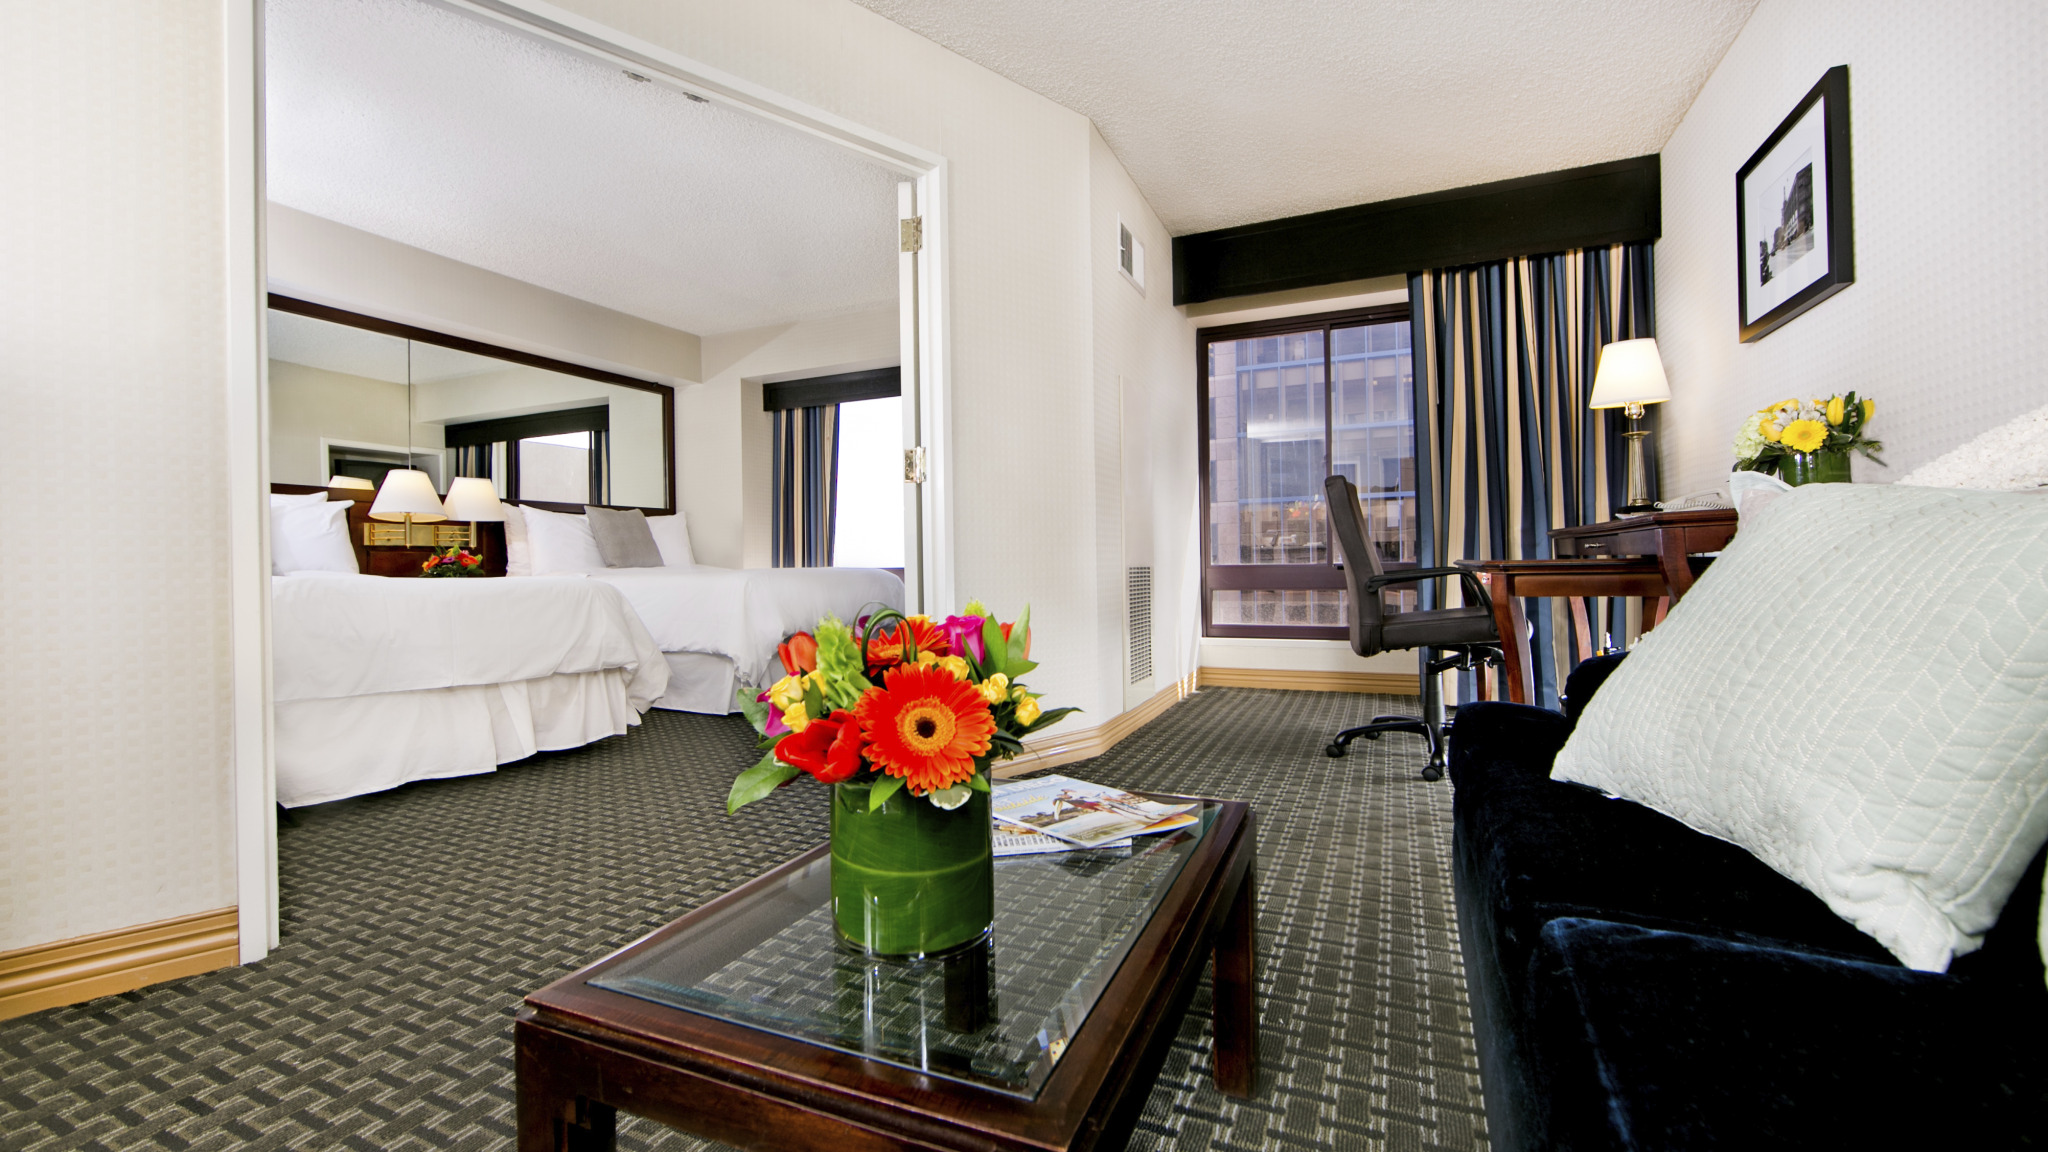 A Guest Suite at Declan Suites San Diego - A Downtown San Diego Hotel.